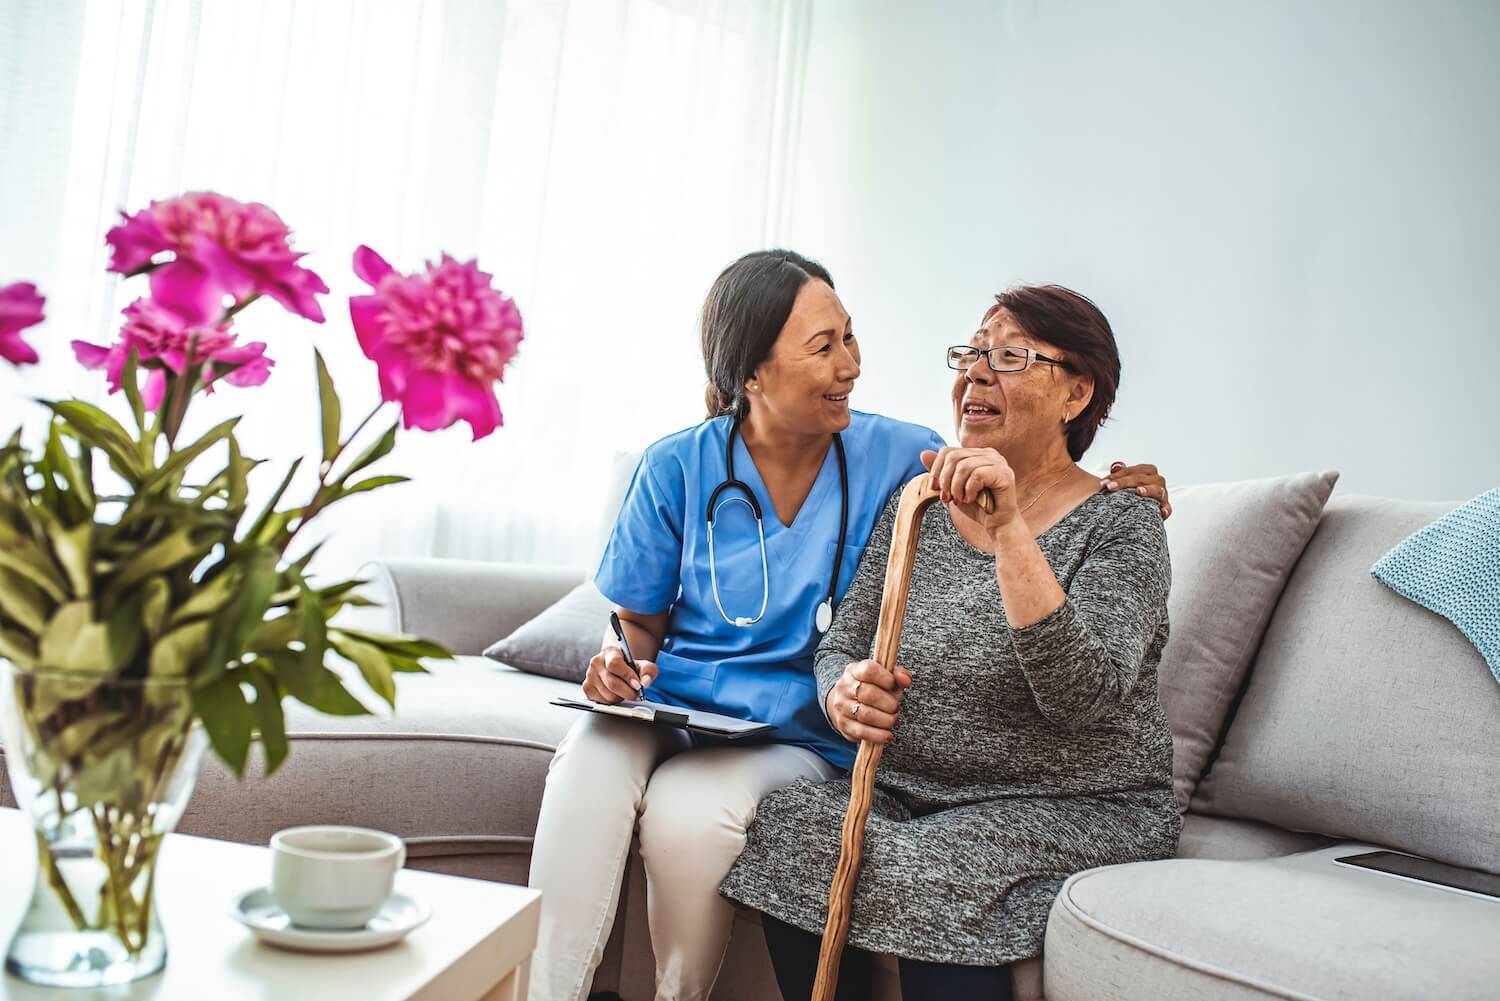 Smiling female medical professional and senior woman with a cane sitting on a couch